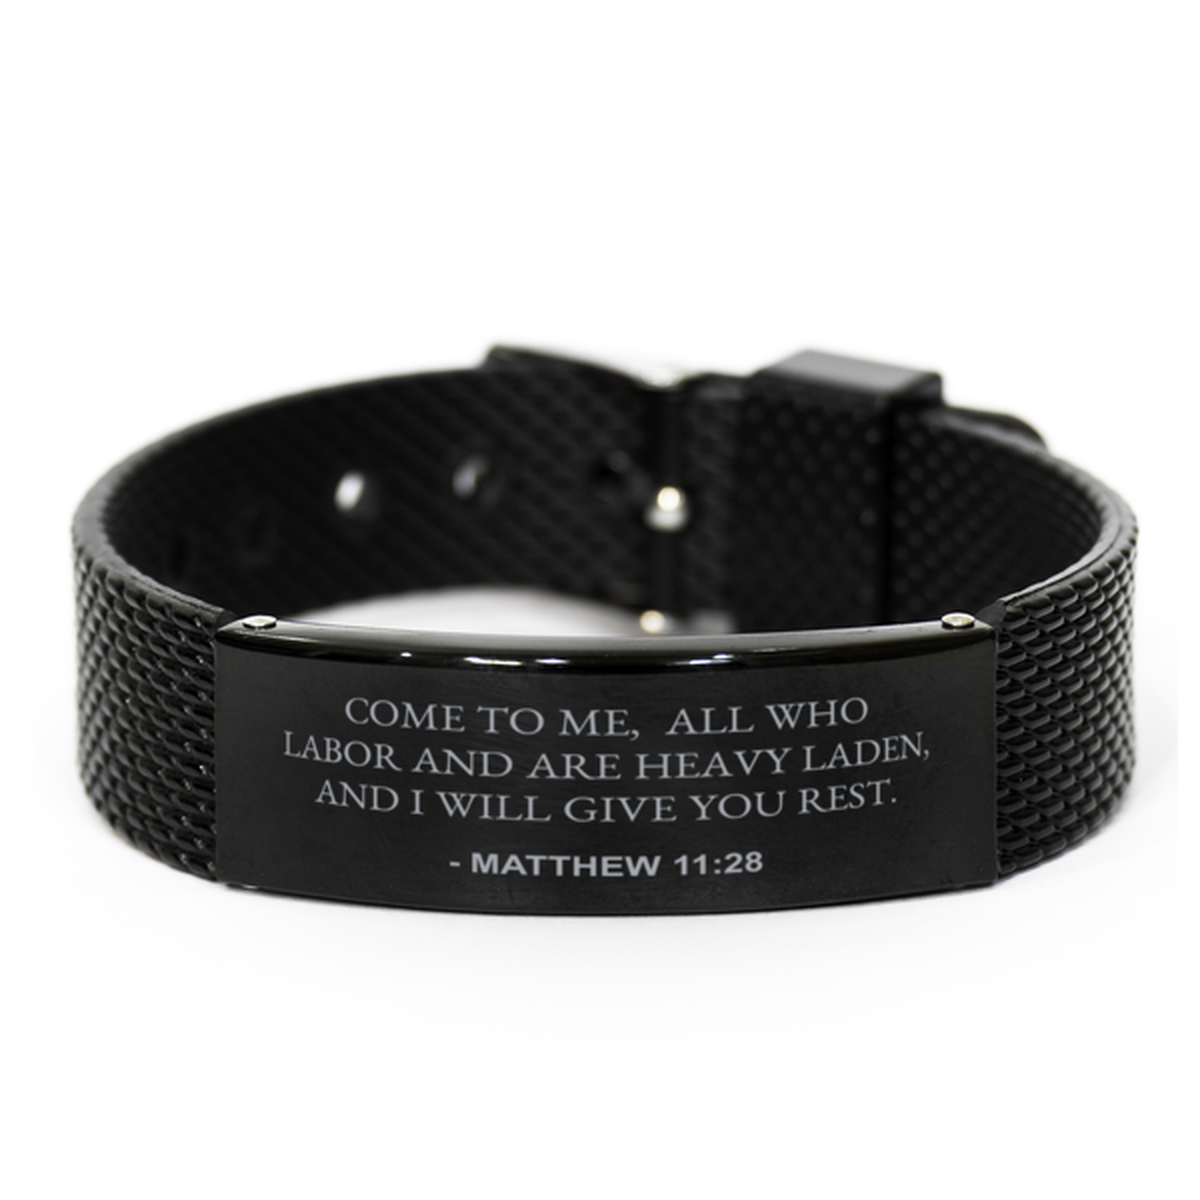 Christian Black Bracelet,, Matthew 11:28 Come To Me, All Who Labor And Are Heavy Laden,, Motivational Bible Verse Gifts For Men Women